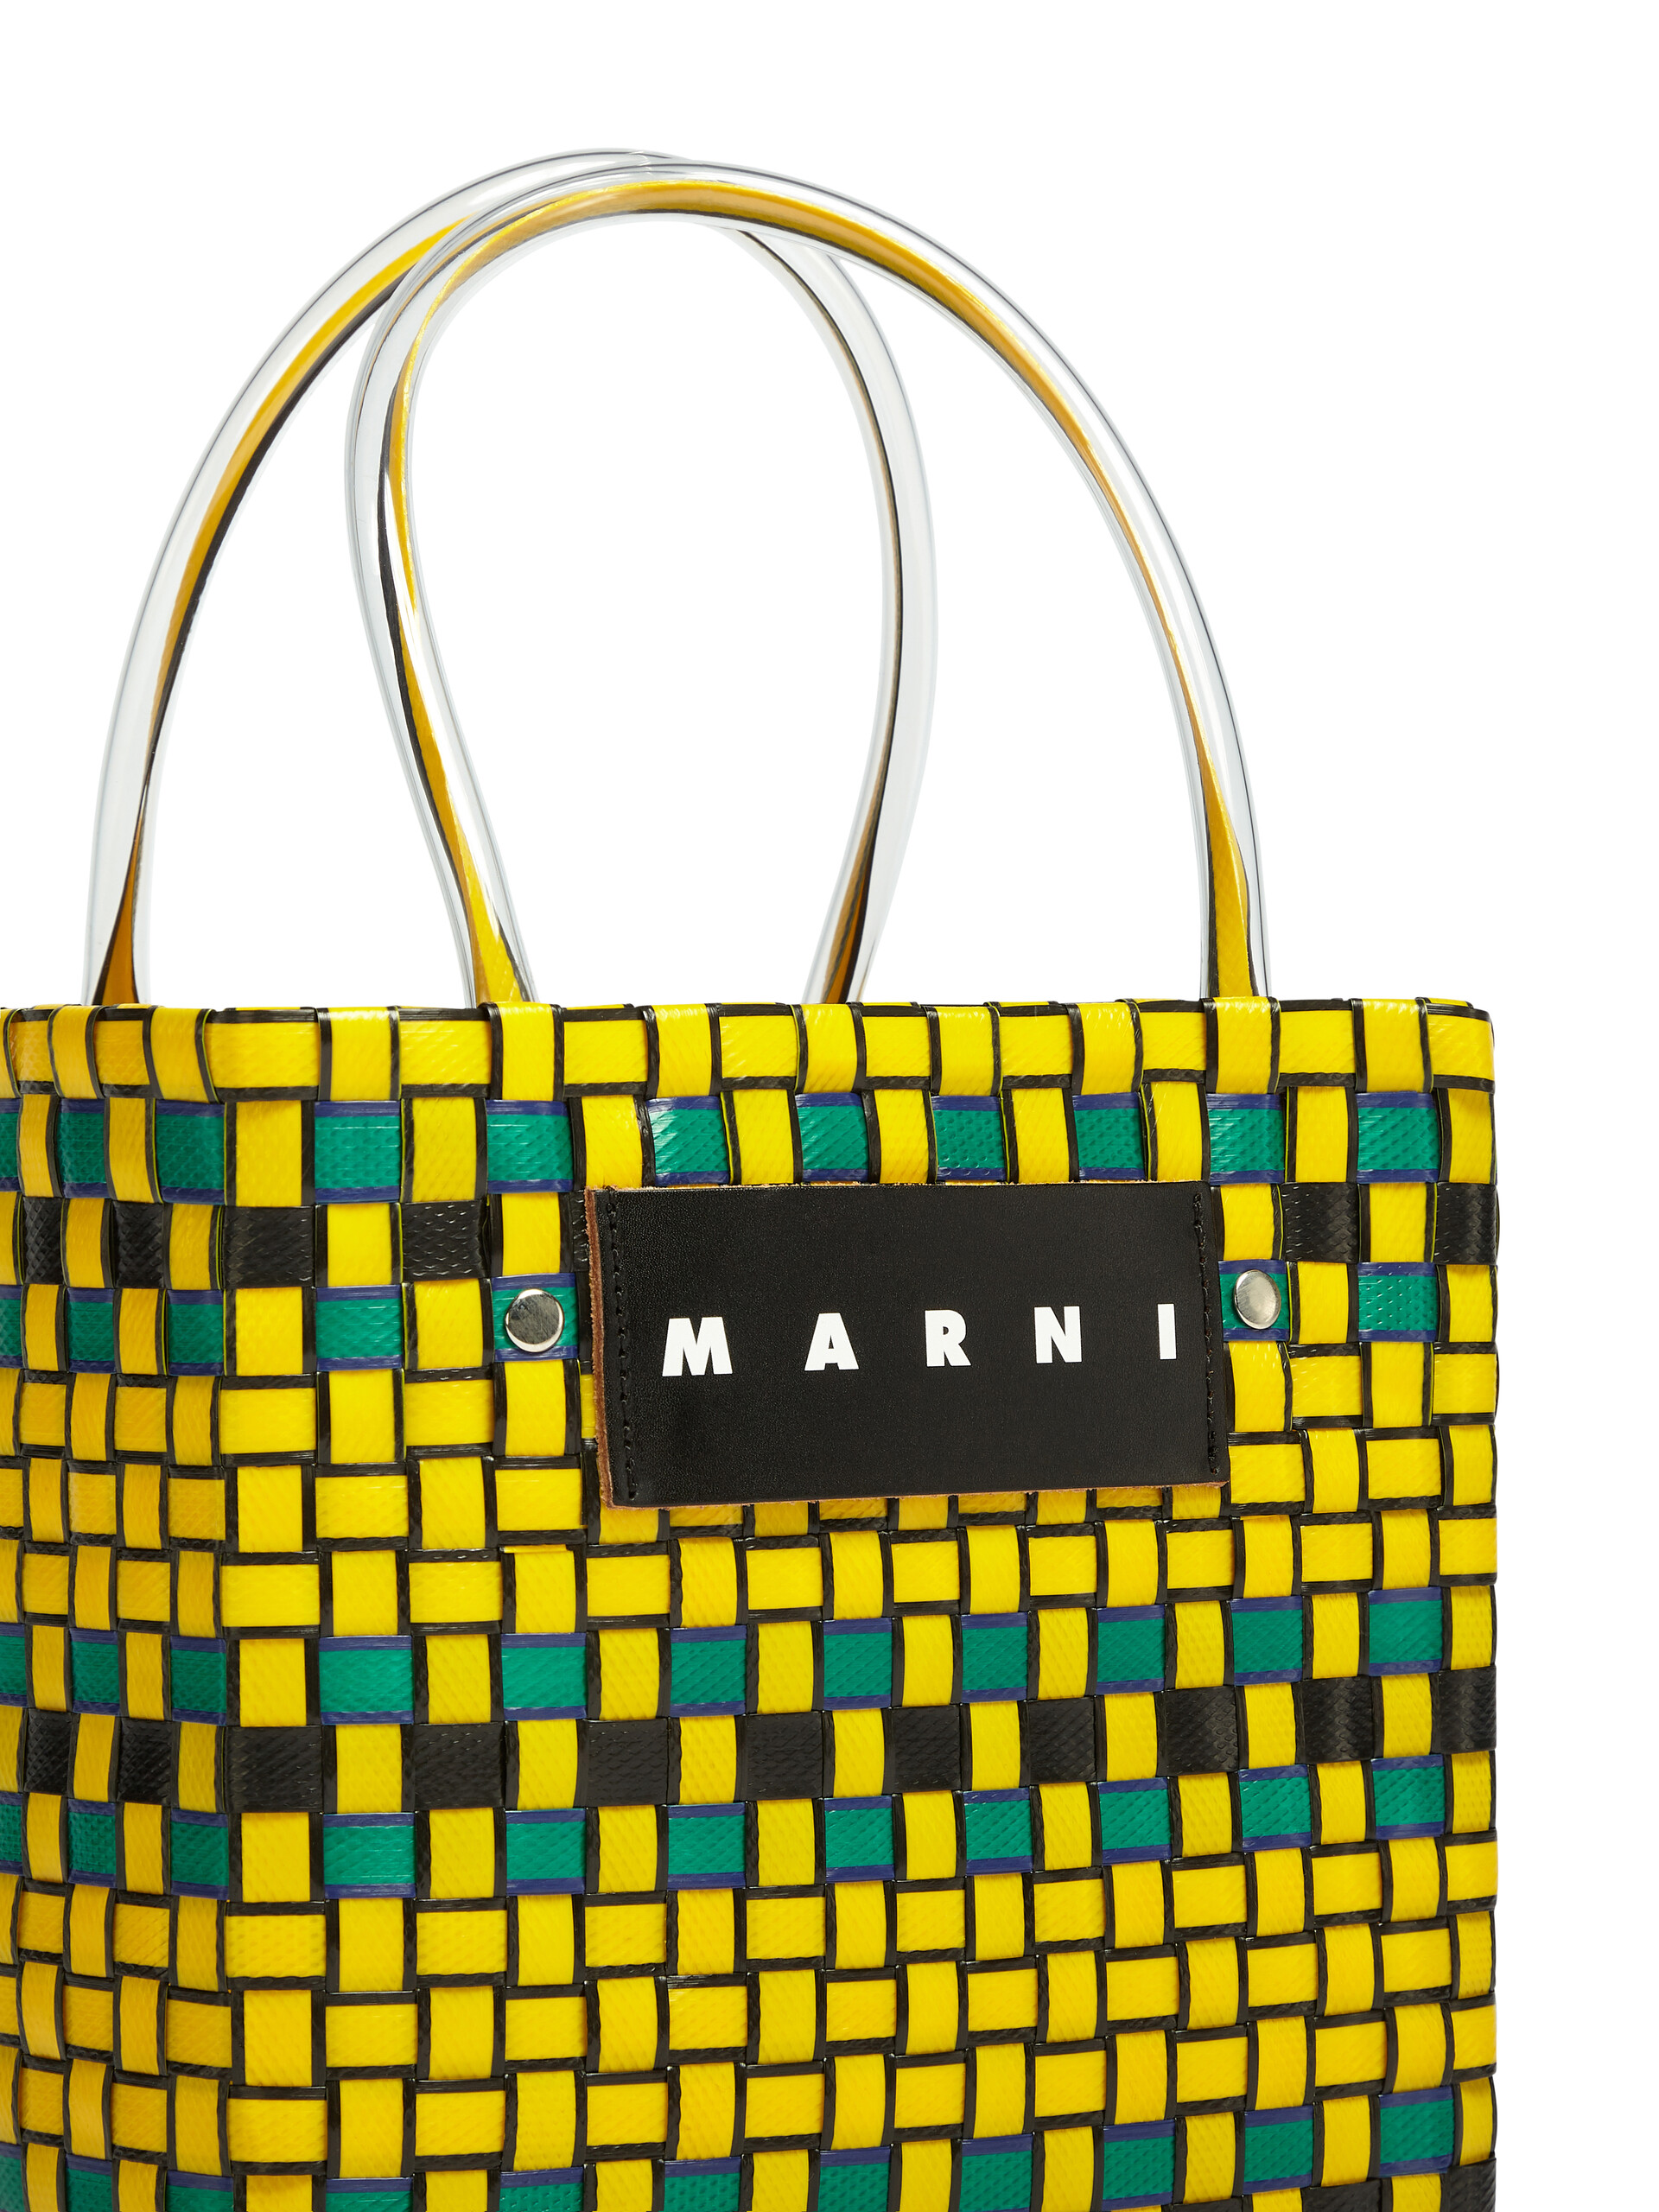 MARNI MARKET BASKET bag in yellow woven material - Shopping Bags - Image 4